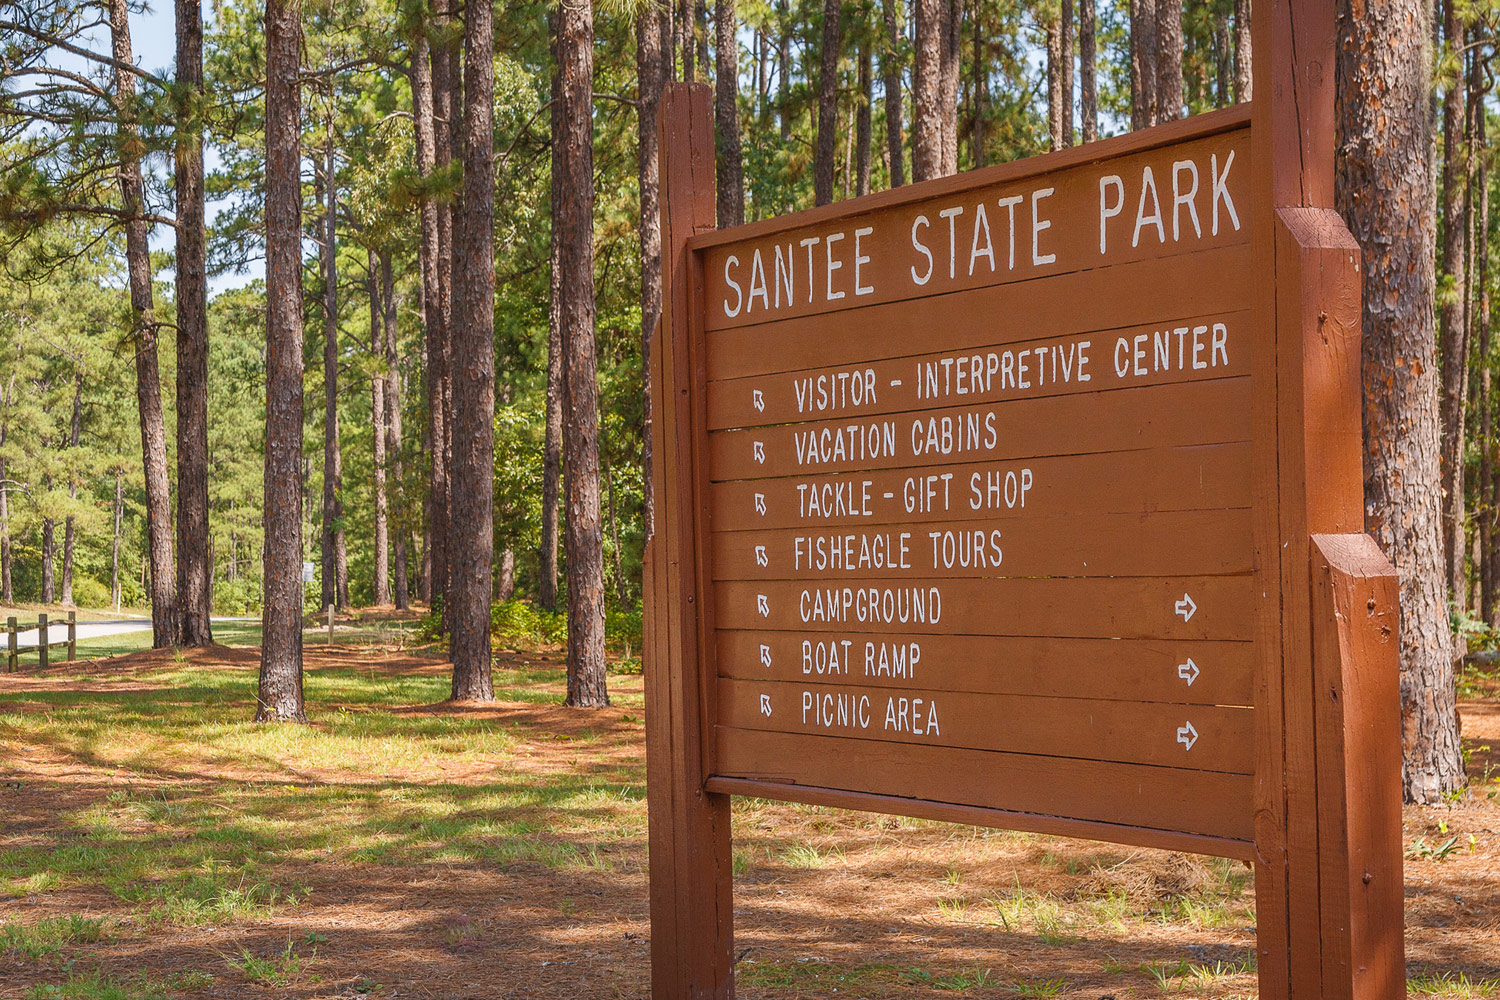 Santee State Park directional sign in woods with direction to campgrounds